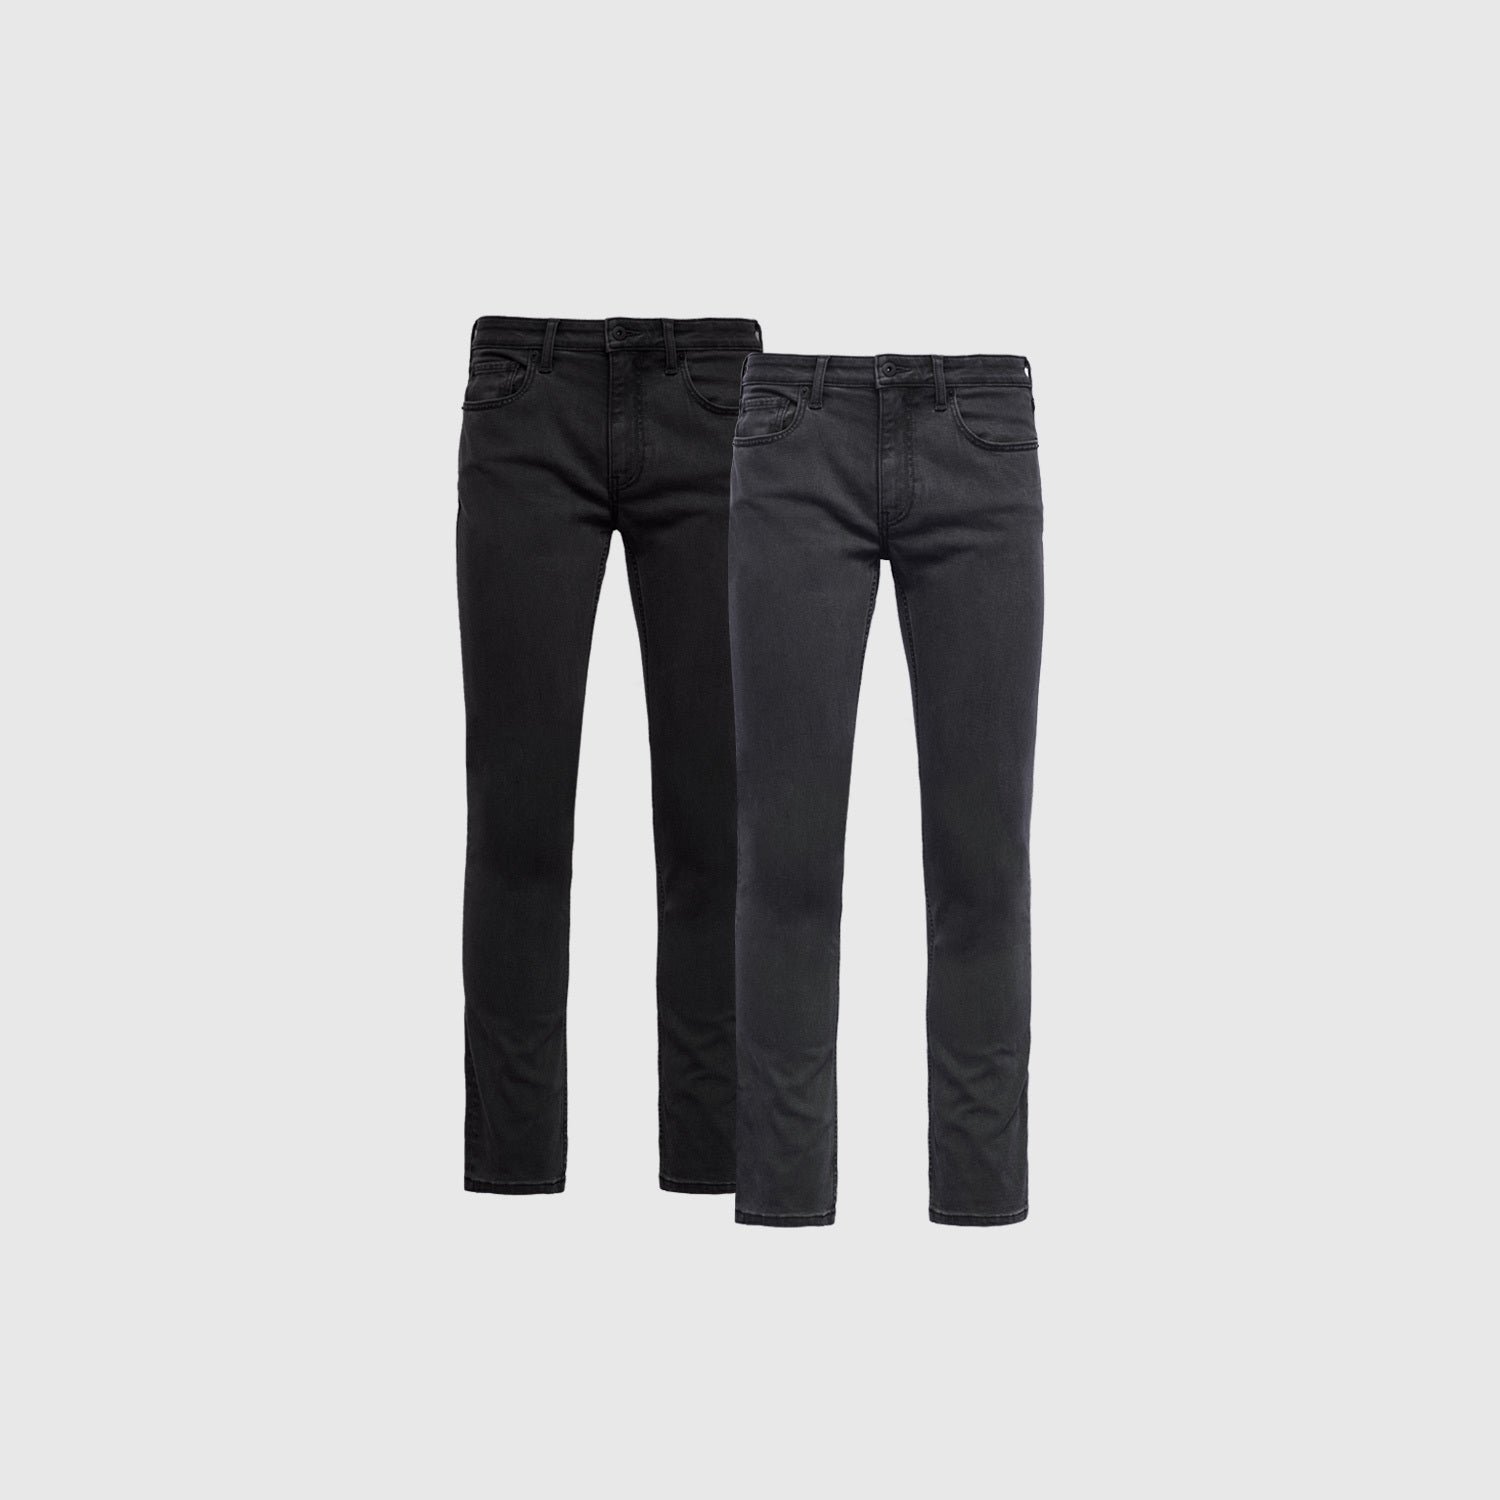 Black and Gray Slim Fit Comfort Jeans 2-Pack